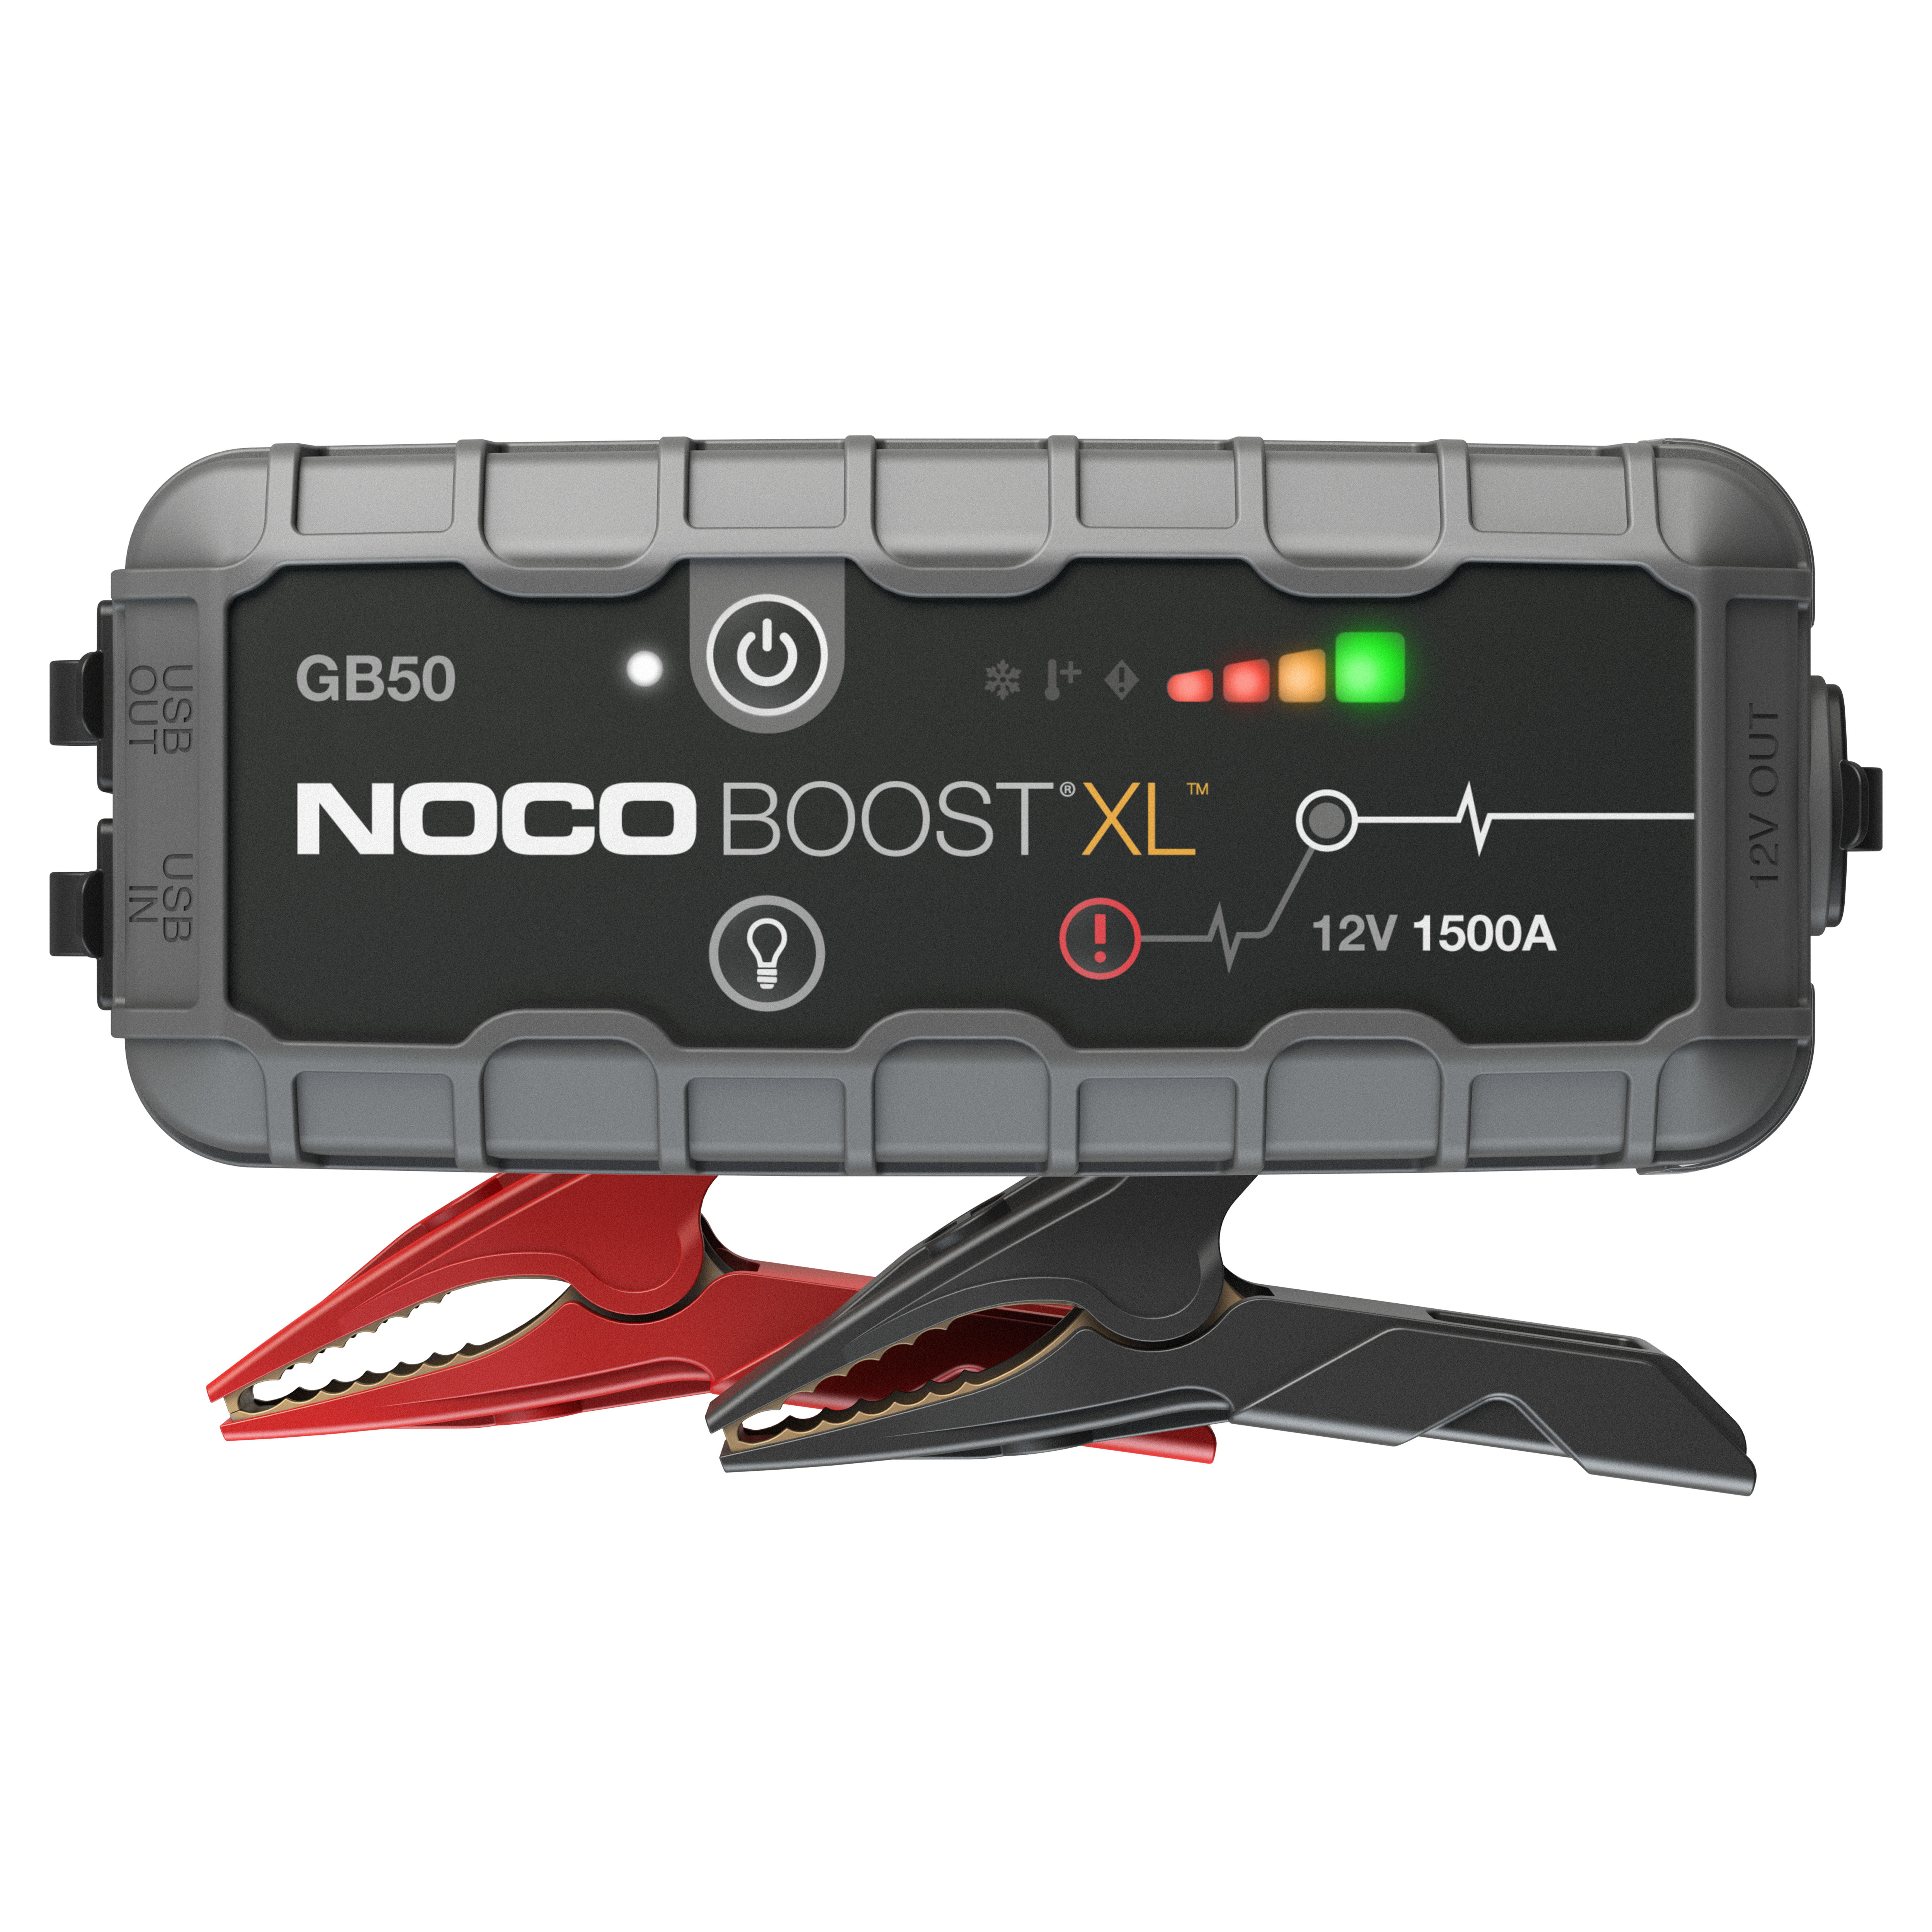 Noco Boost XL GB50 booster jump starter starting aid power bank